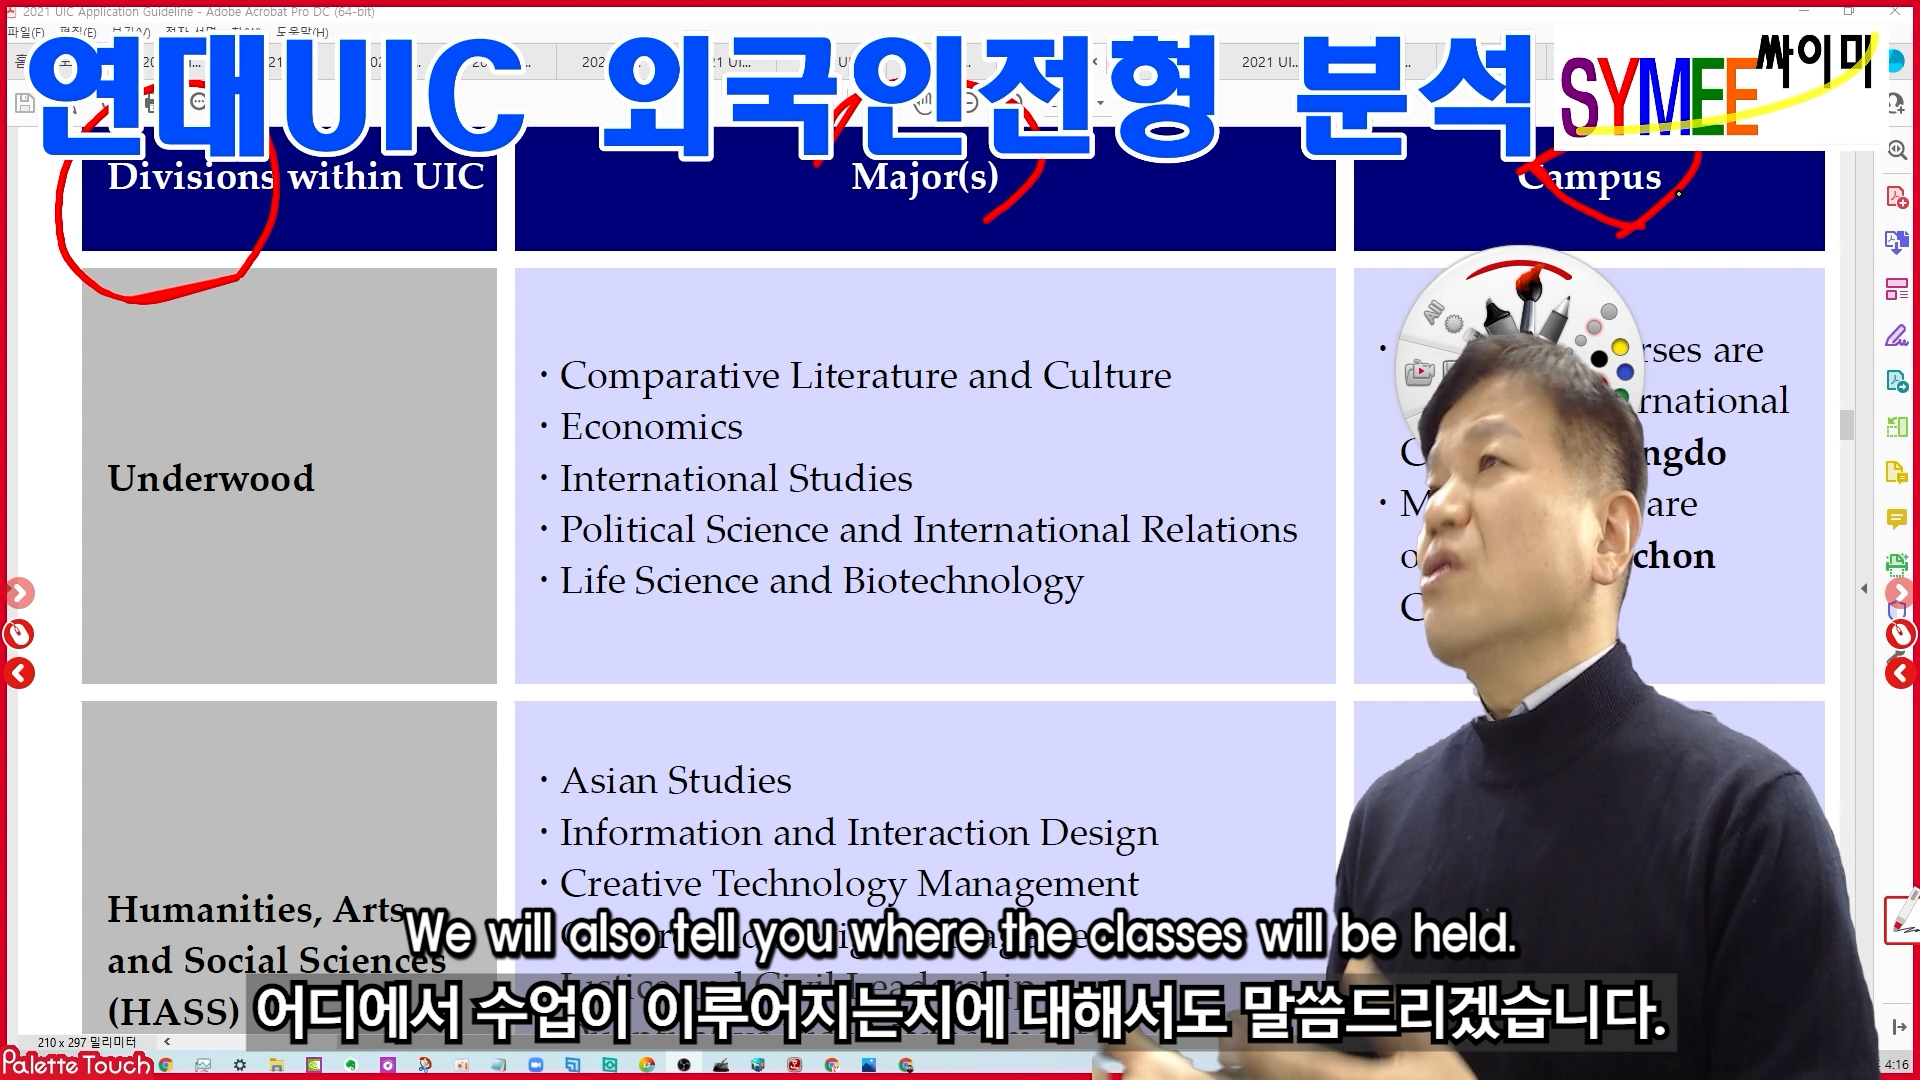 Yonsei Univ. Admission for UIC for Foreign Student 05 Majors.00_00_31_52.스틸 002.jpg